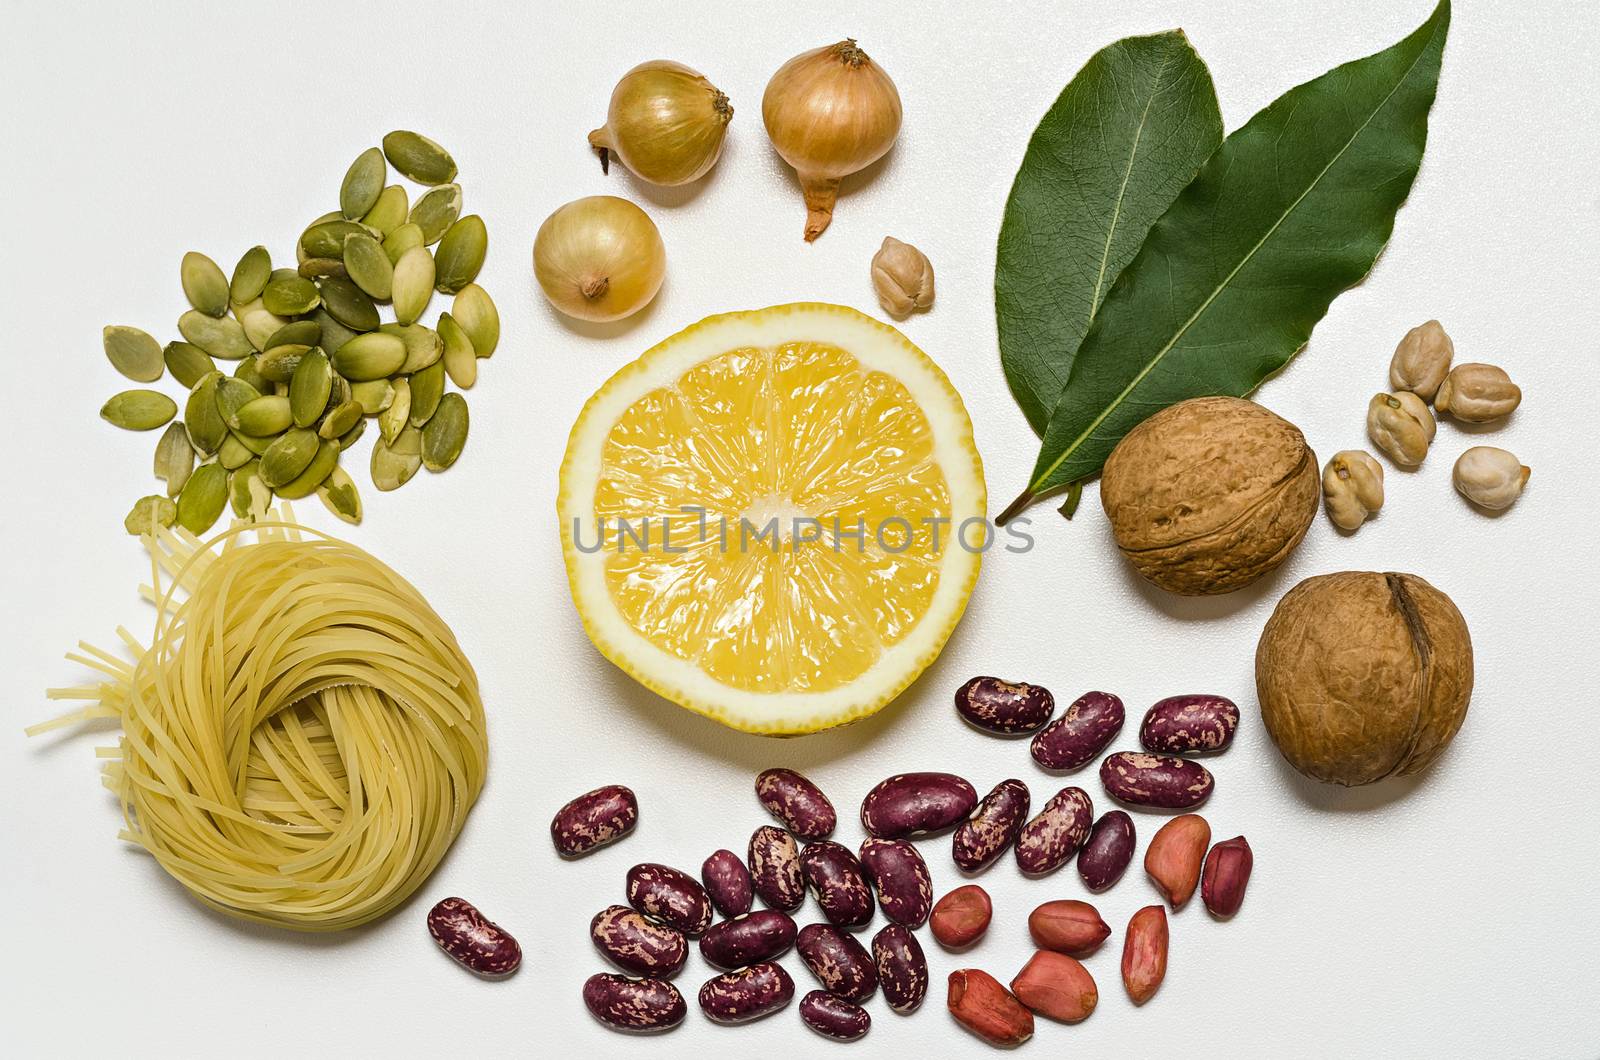 Pasta and spices lie groups on a white background by Gaina